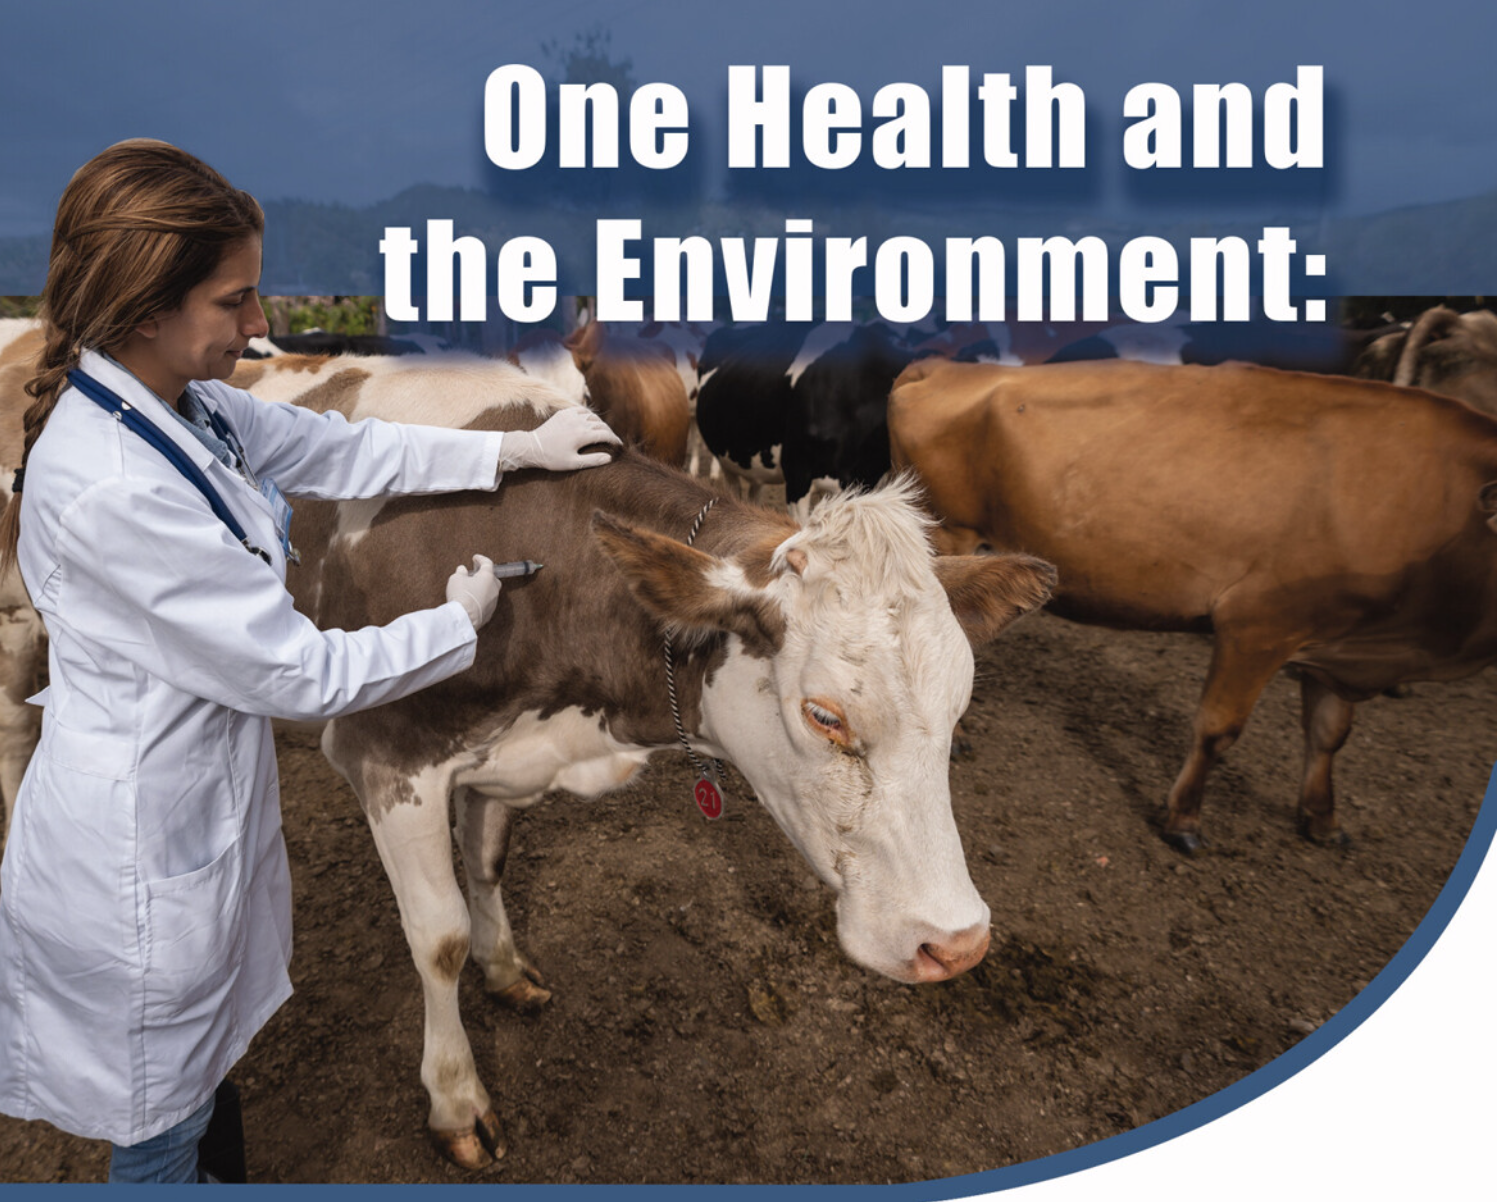 One Health and the Environment: From Conceptual Framework to Implementation Science